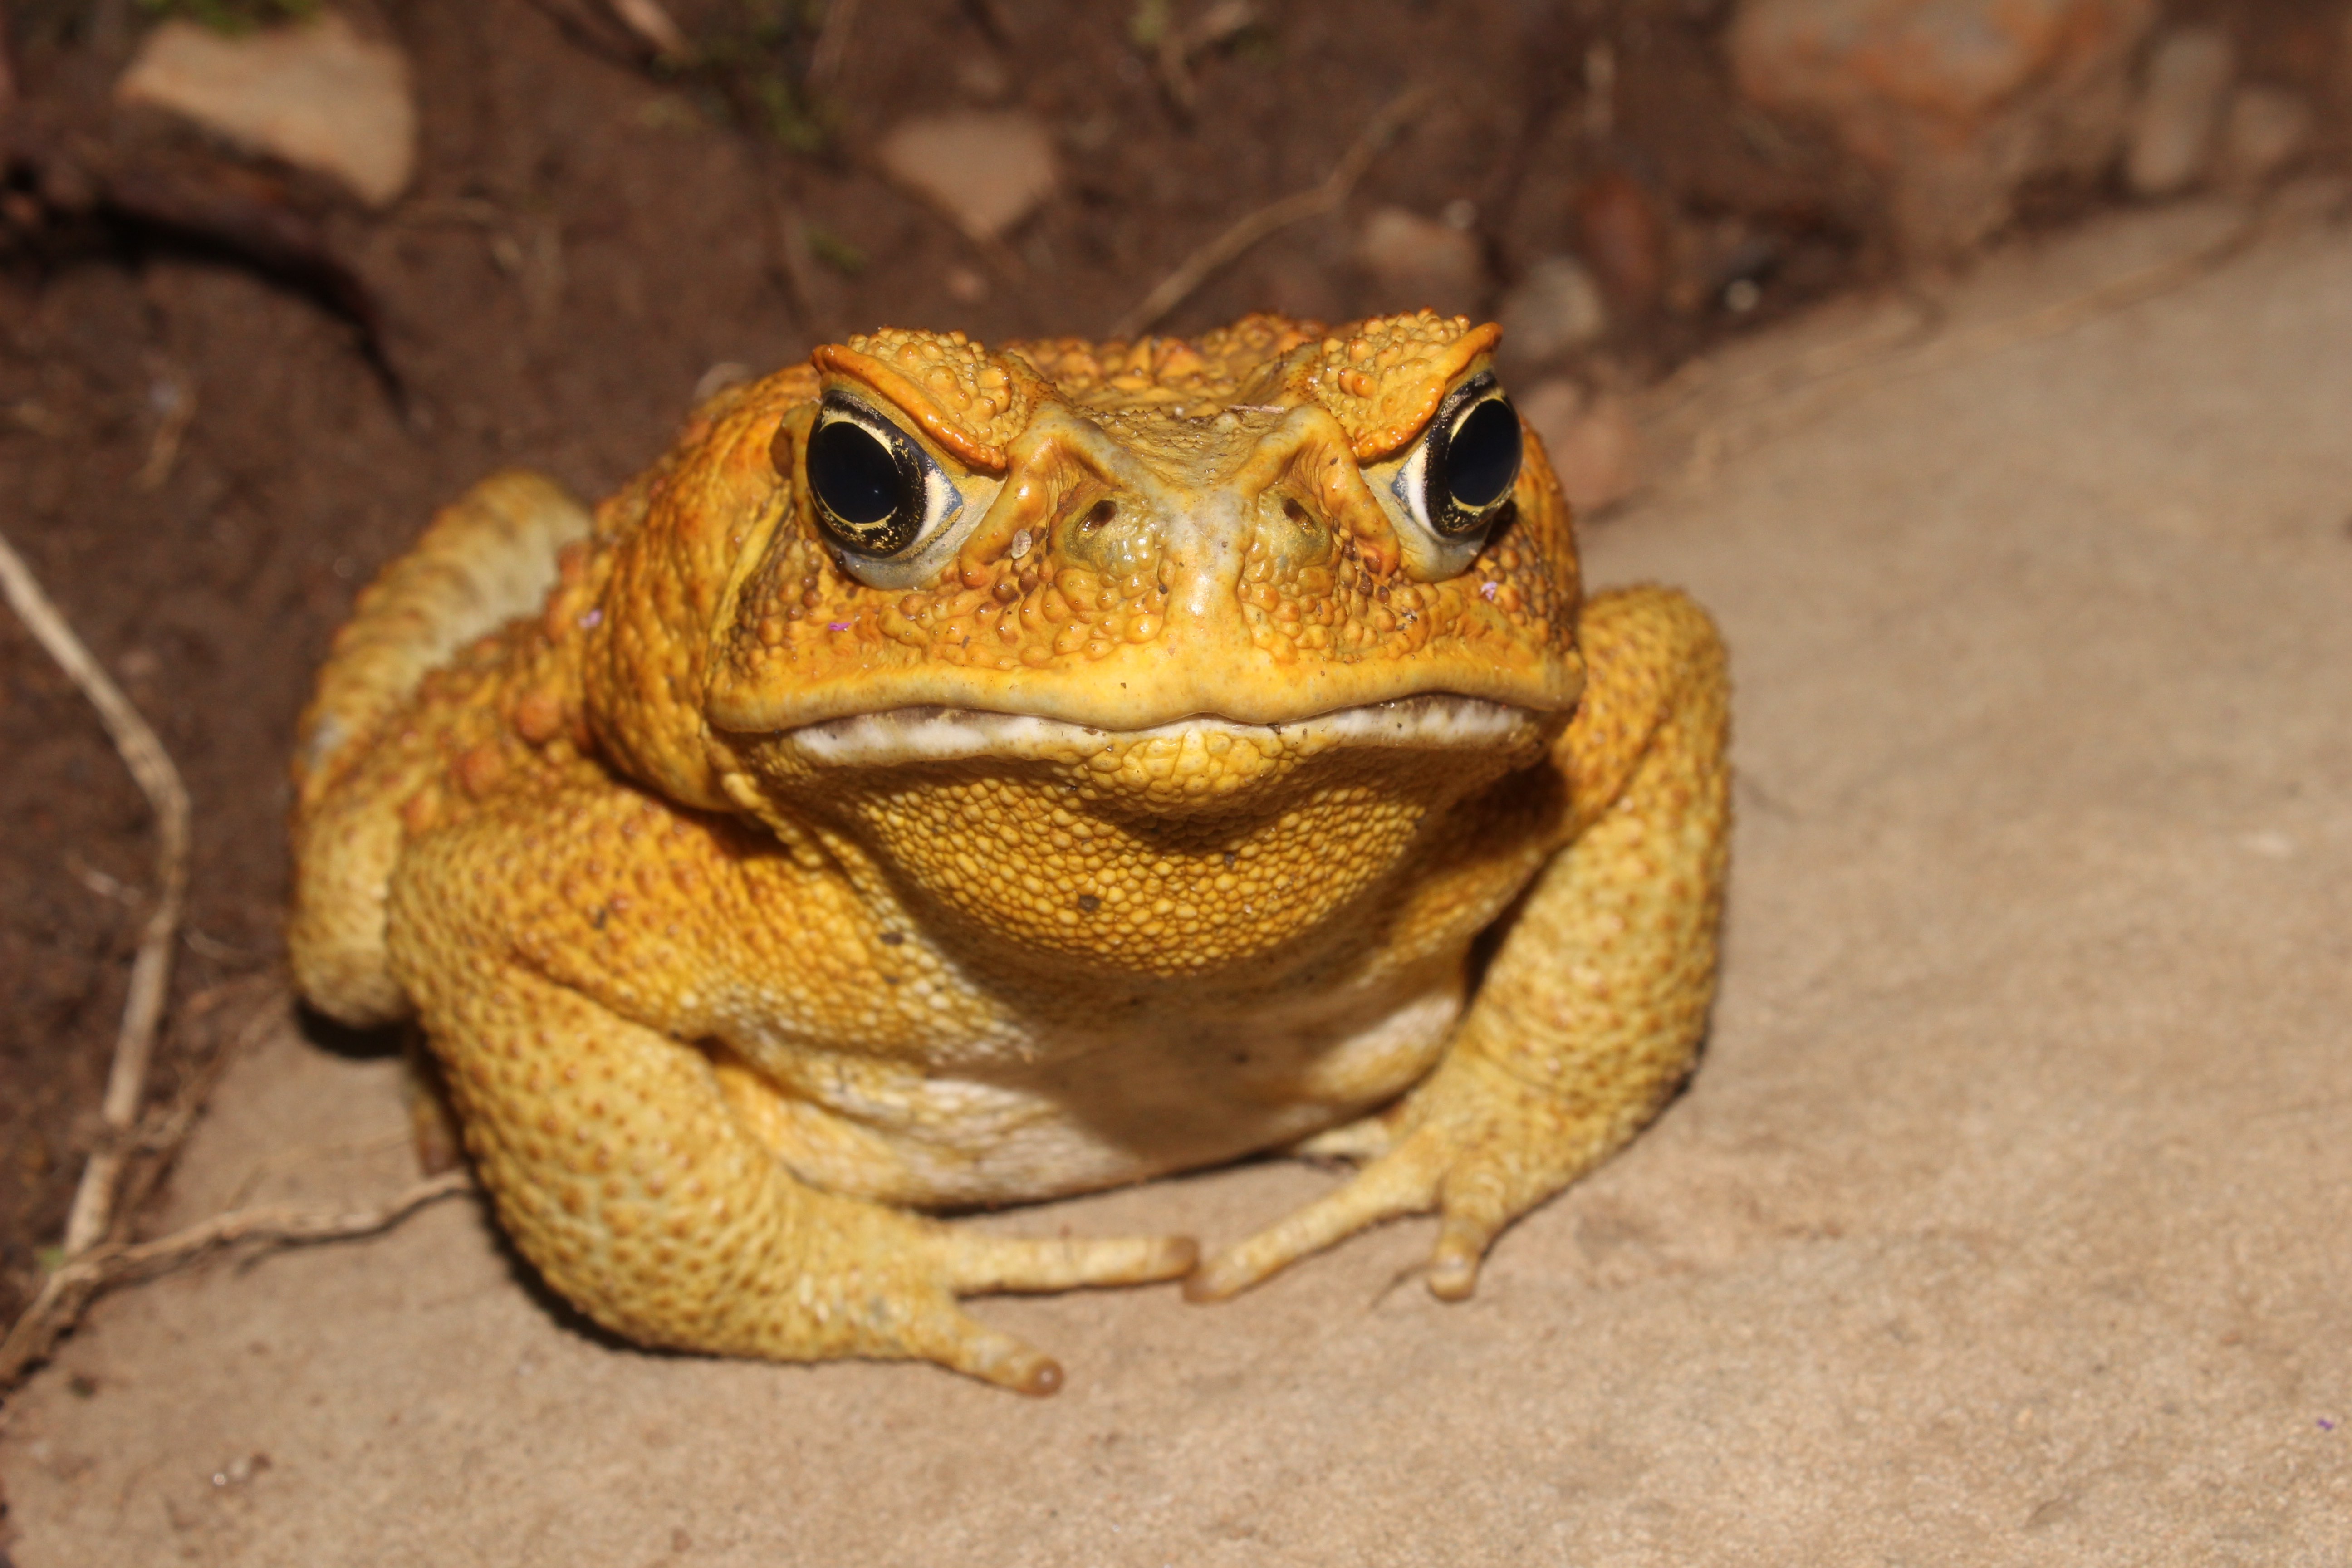 An adult male cane toad